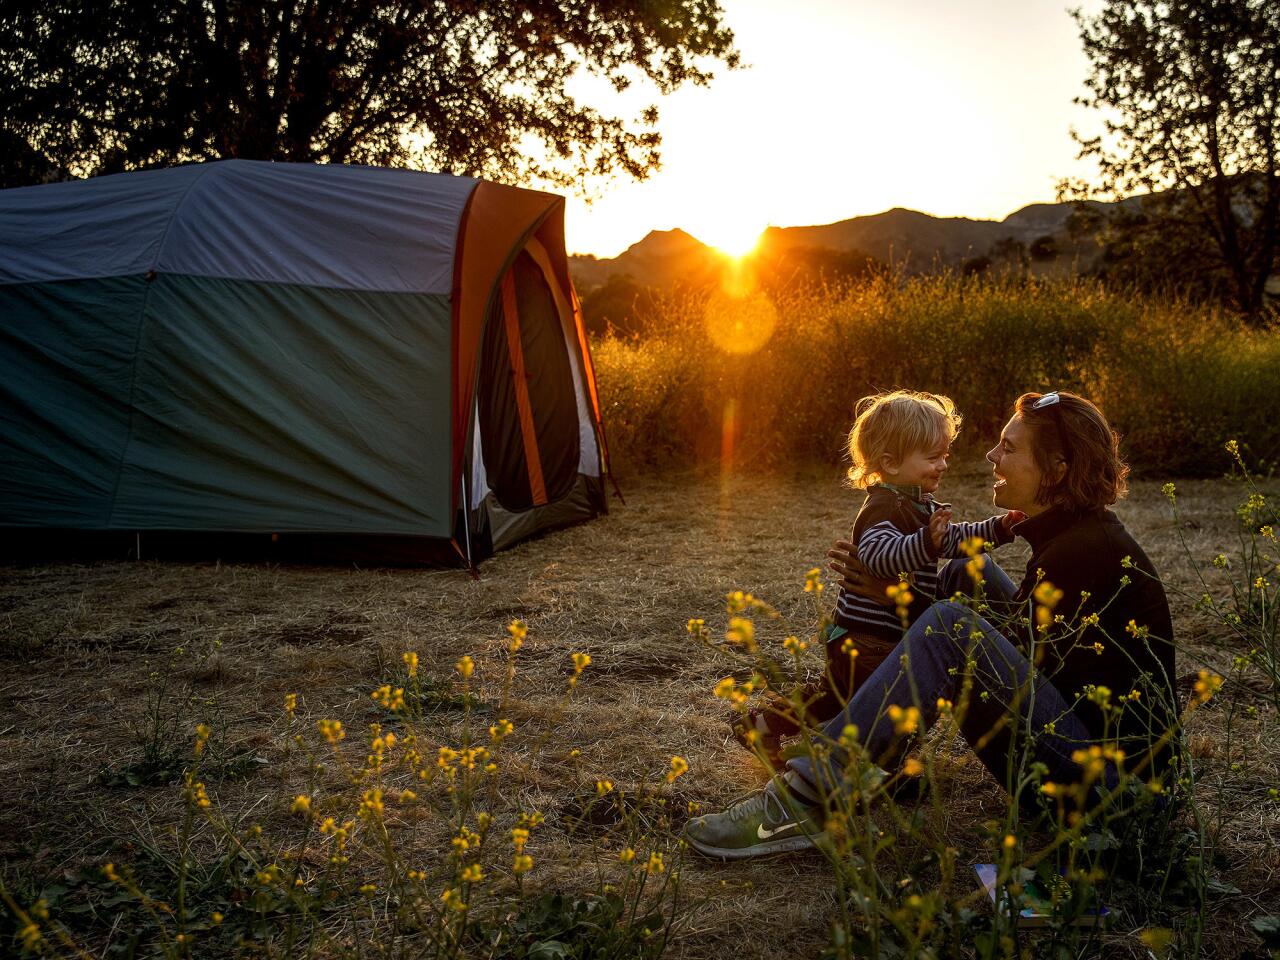 Sarah Raich, from Munich, Germany, enjoys a moment with her son Kolja, 1, as the sun sets on their campsite at Malibu Creek State Park in Calabasas.